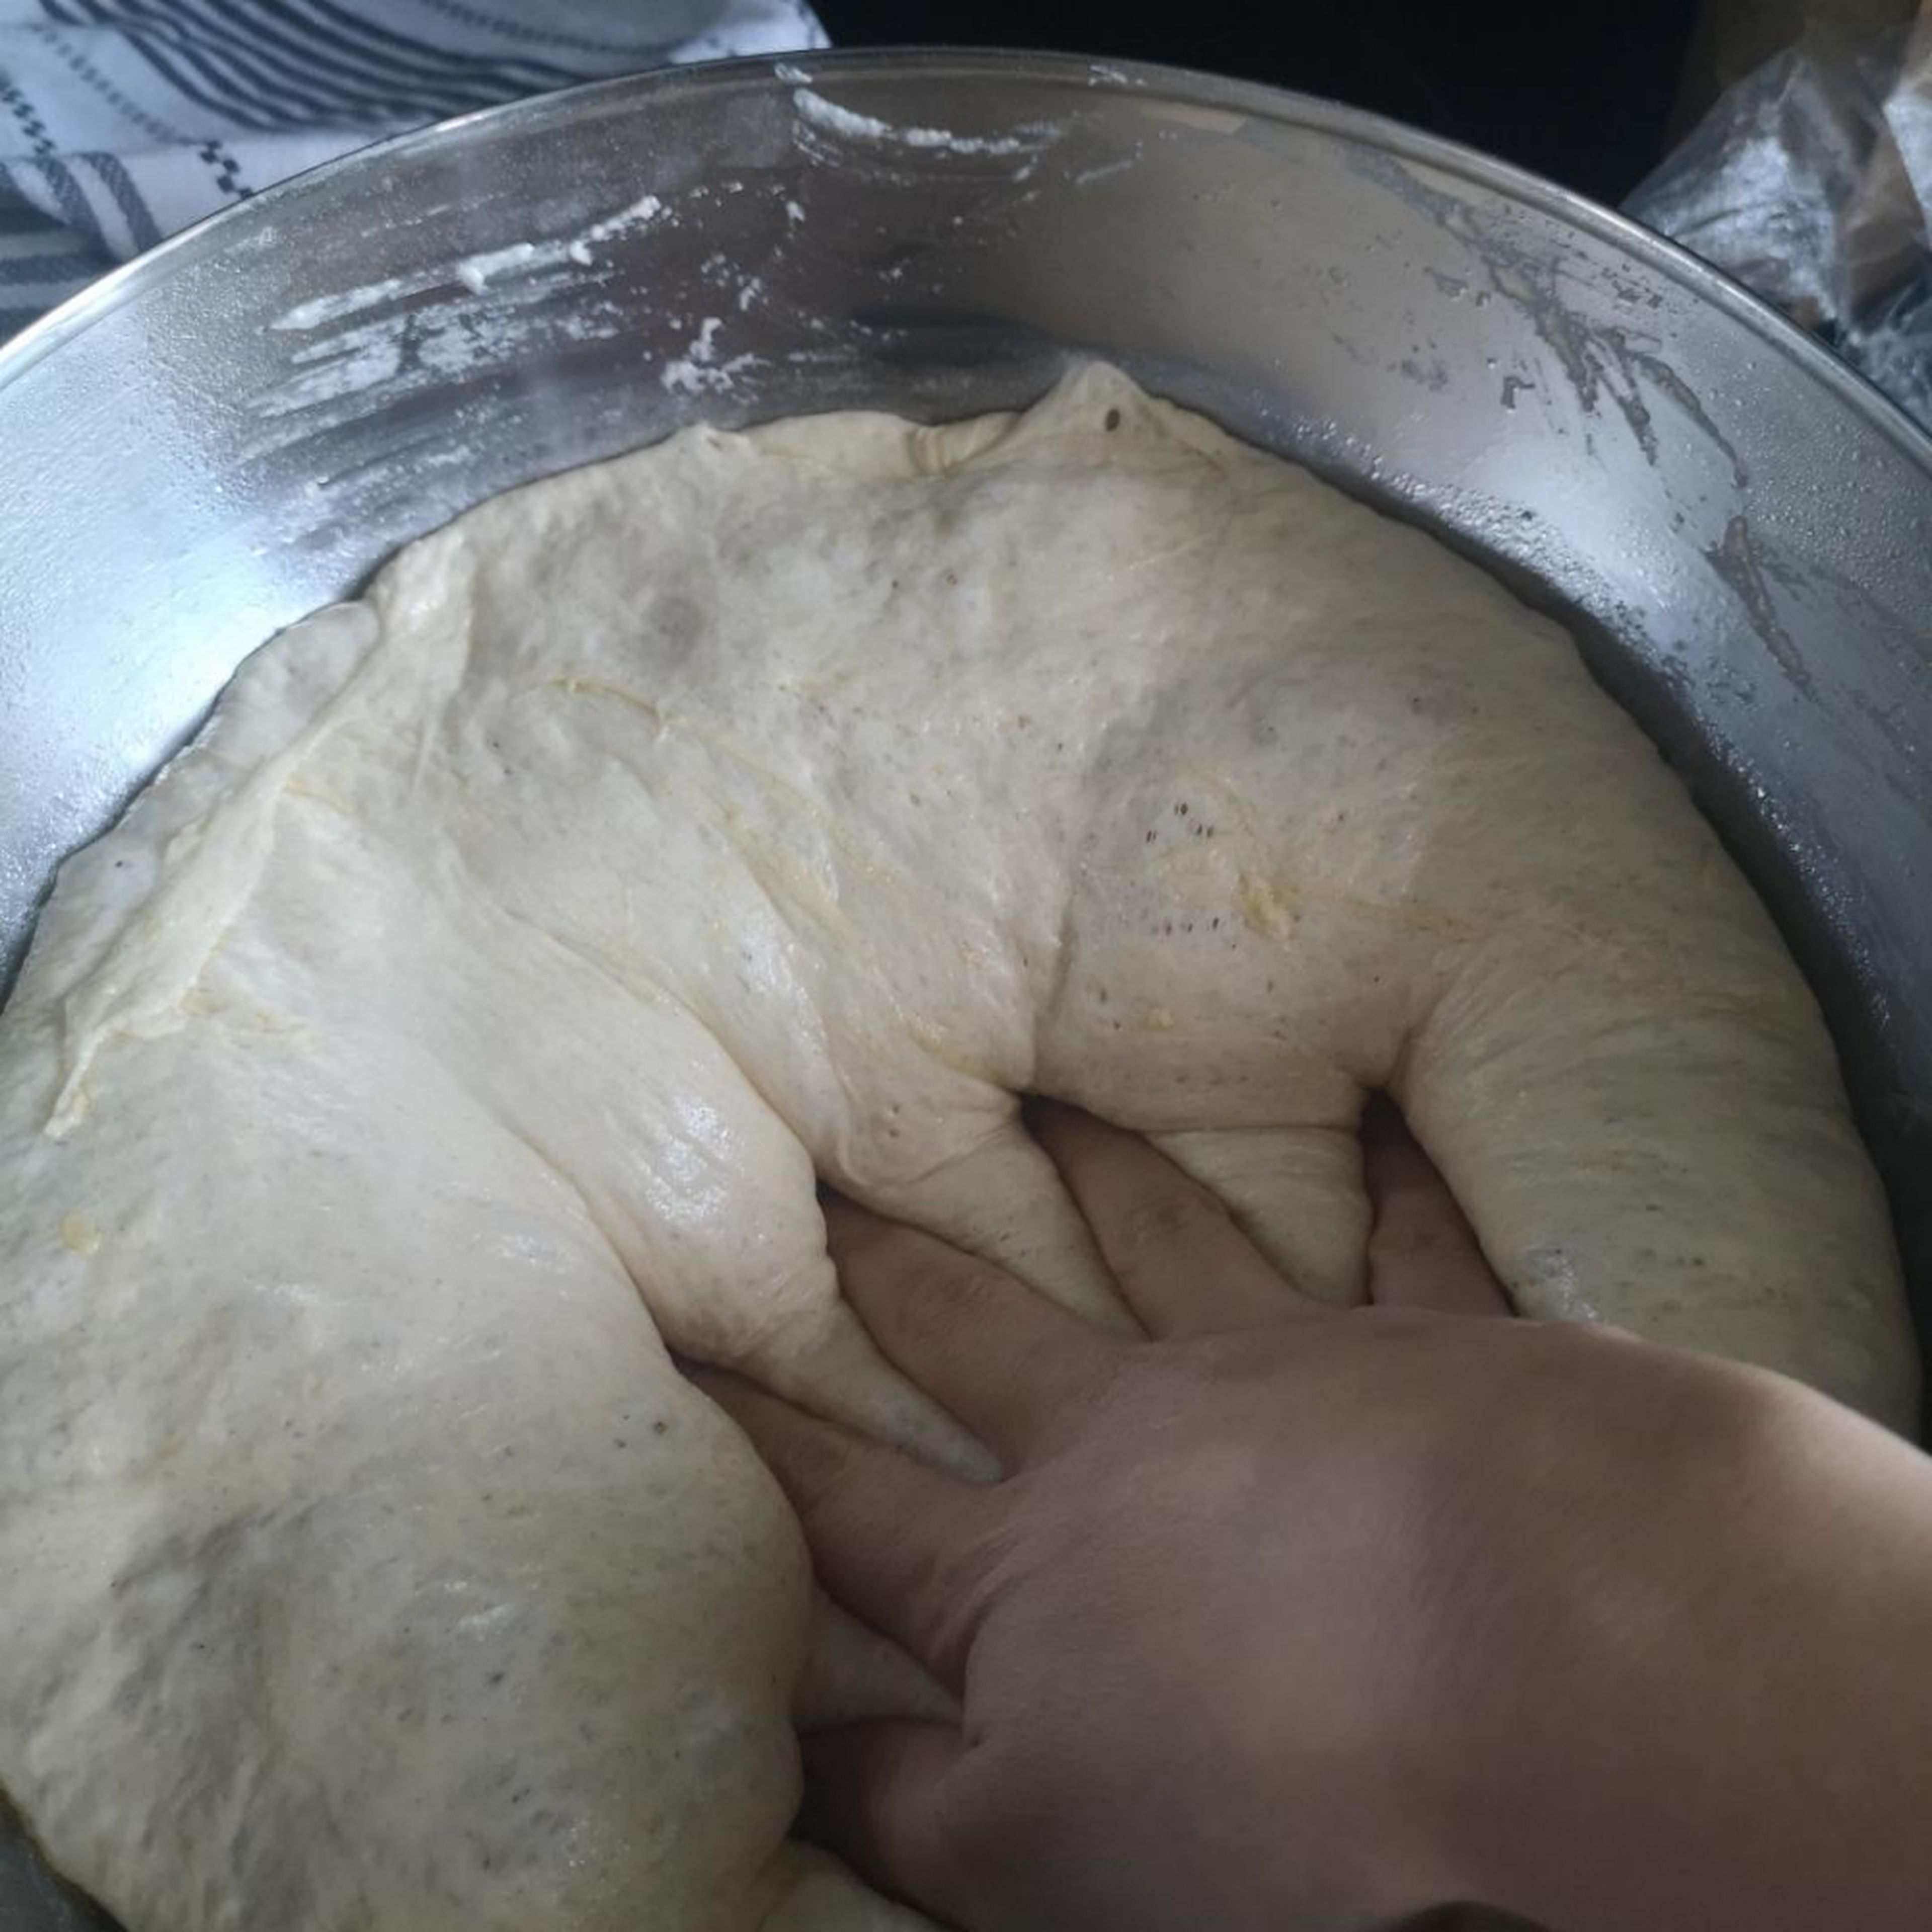 two hours later, your dough should have at least doubled in size, kneed it slightly back into its shape for about 10 to 20 seconds